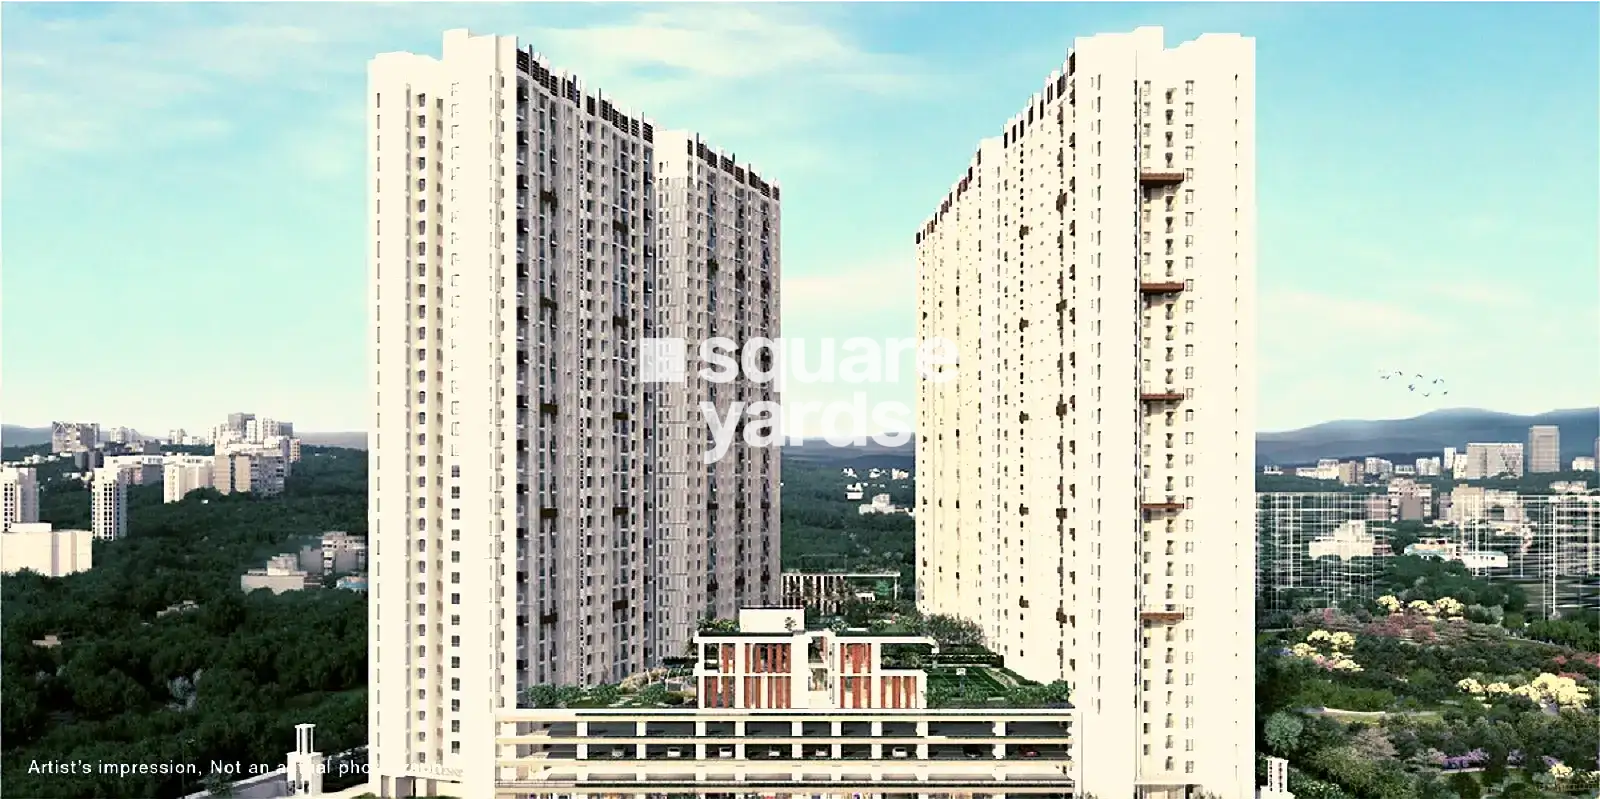 Flats for Sale in Pune  Godrej Properties in Pune